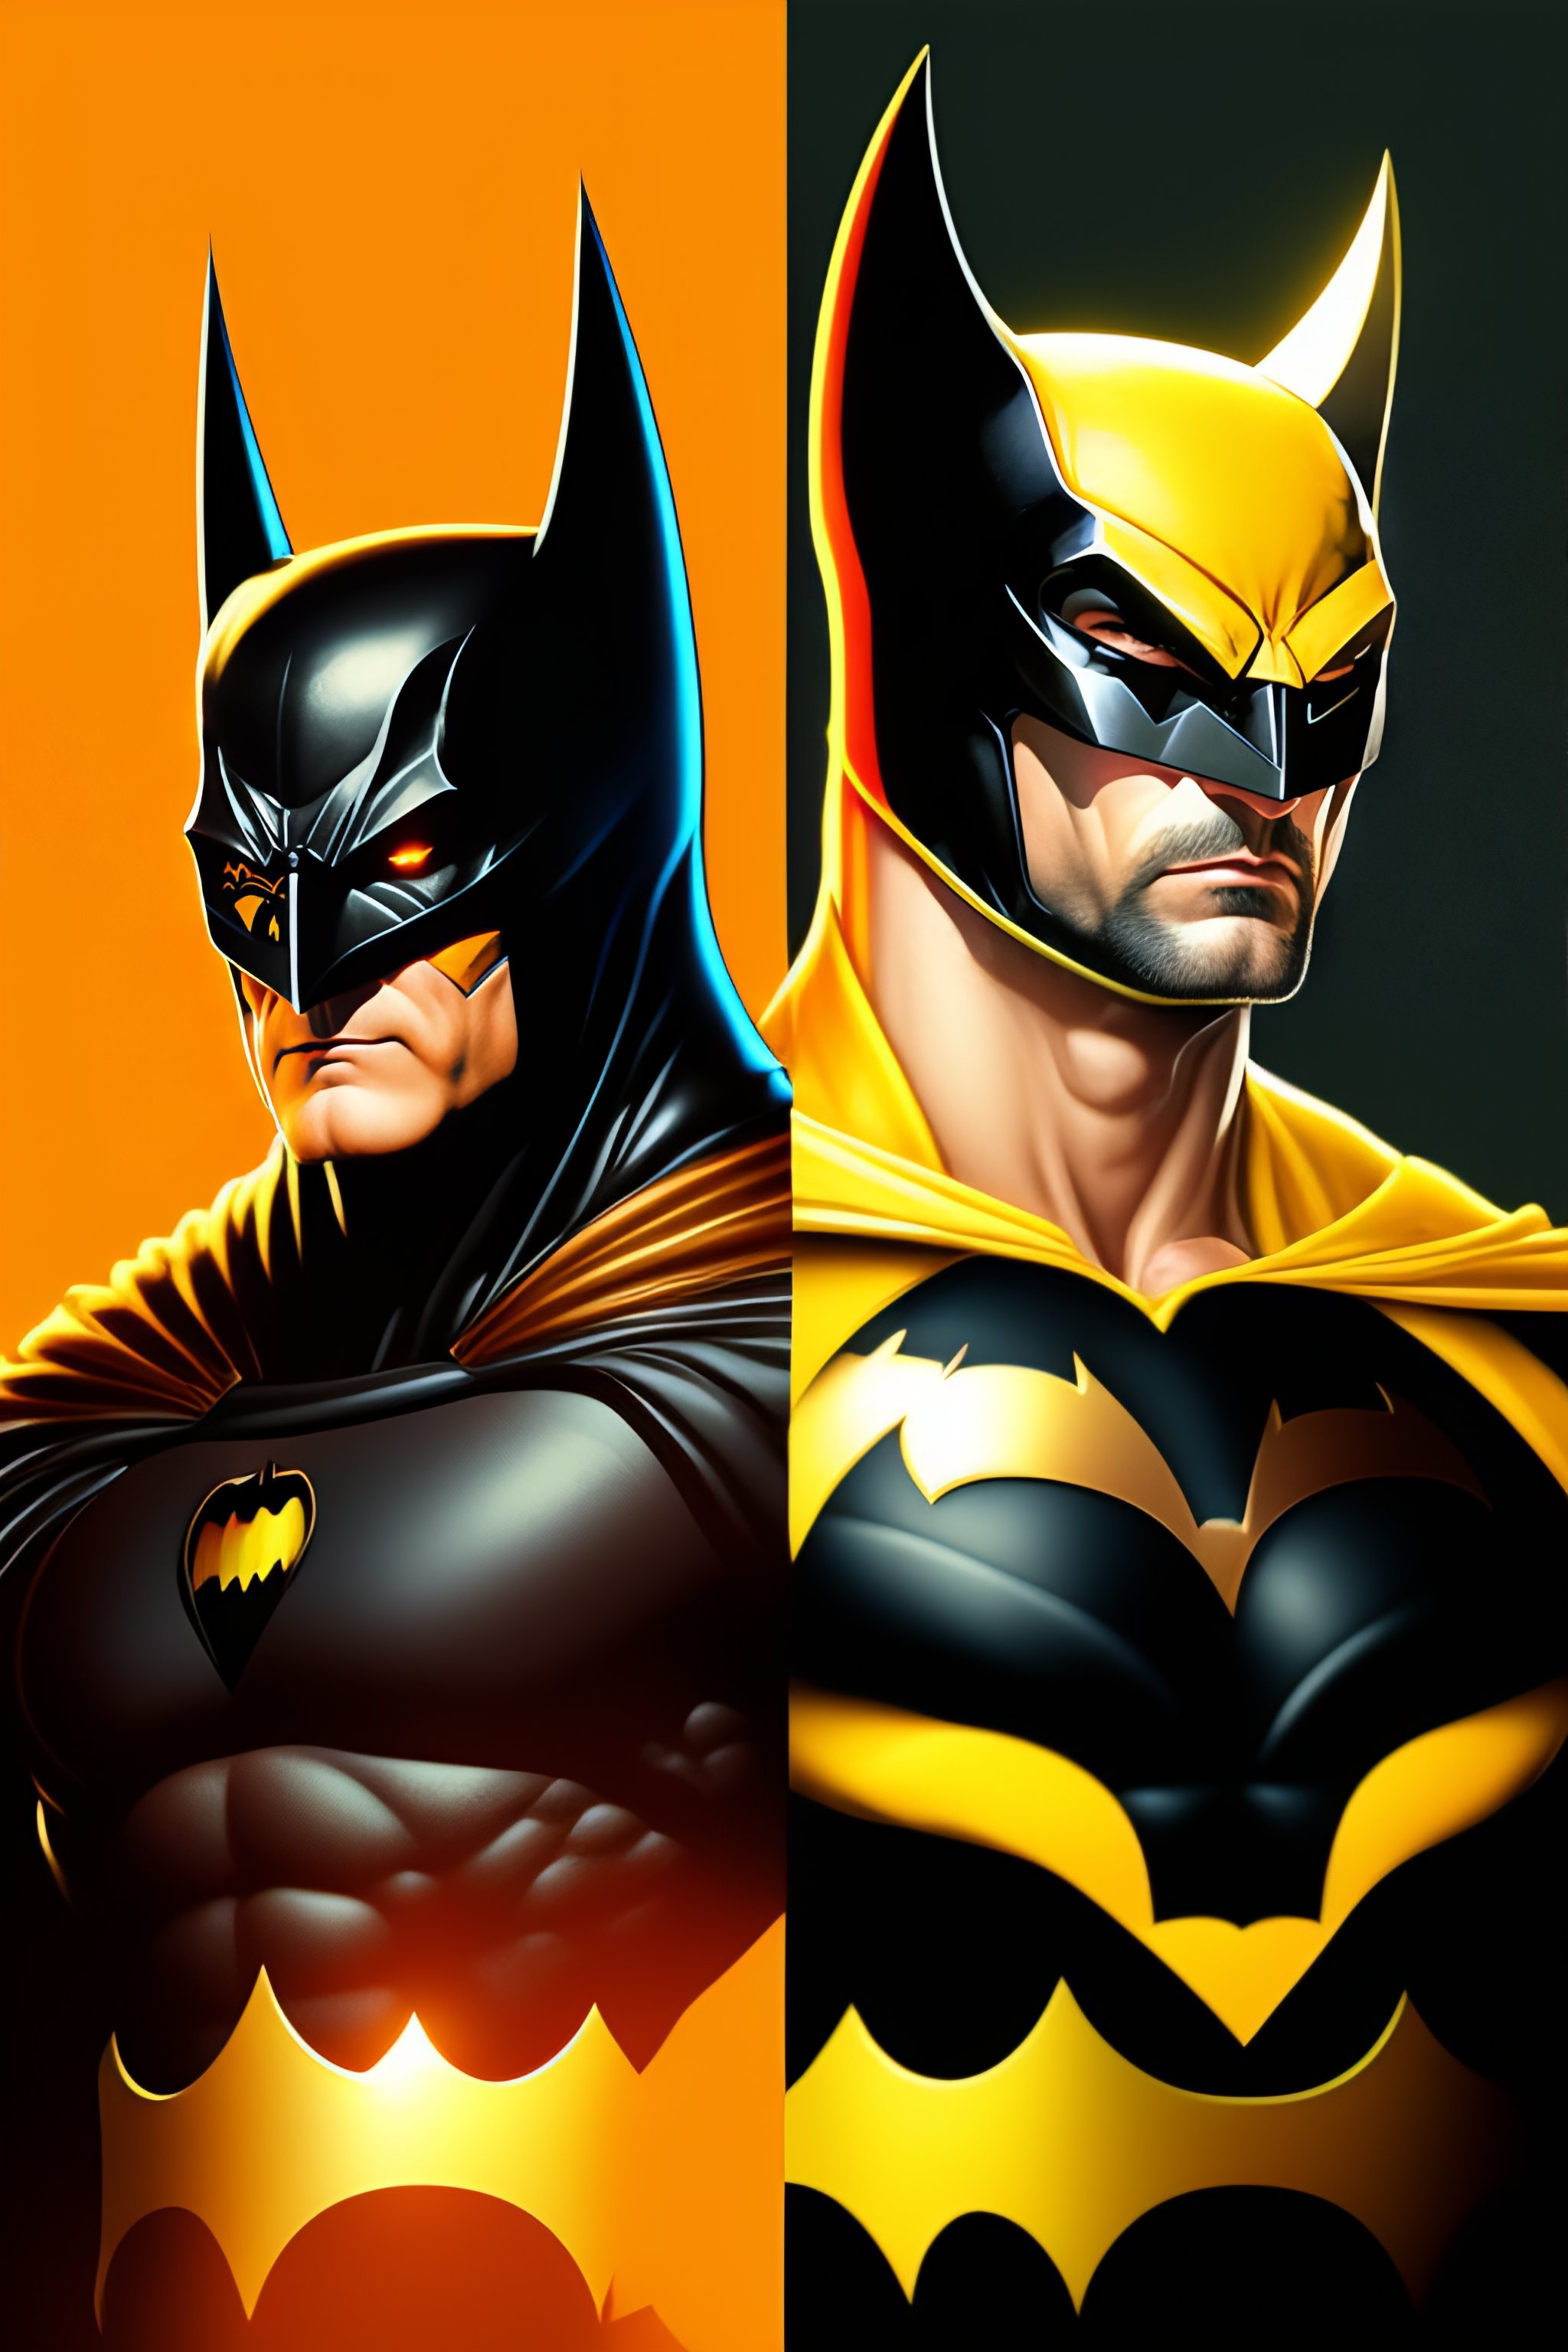 Lexica - Vector art of Fusion of batman and Wolverine